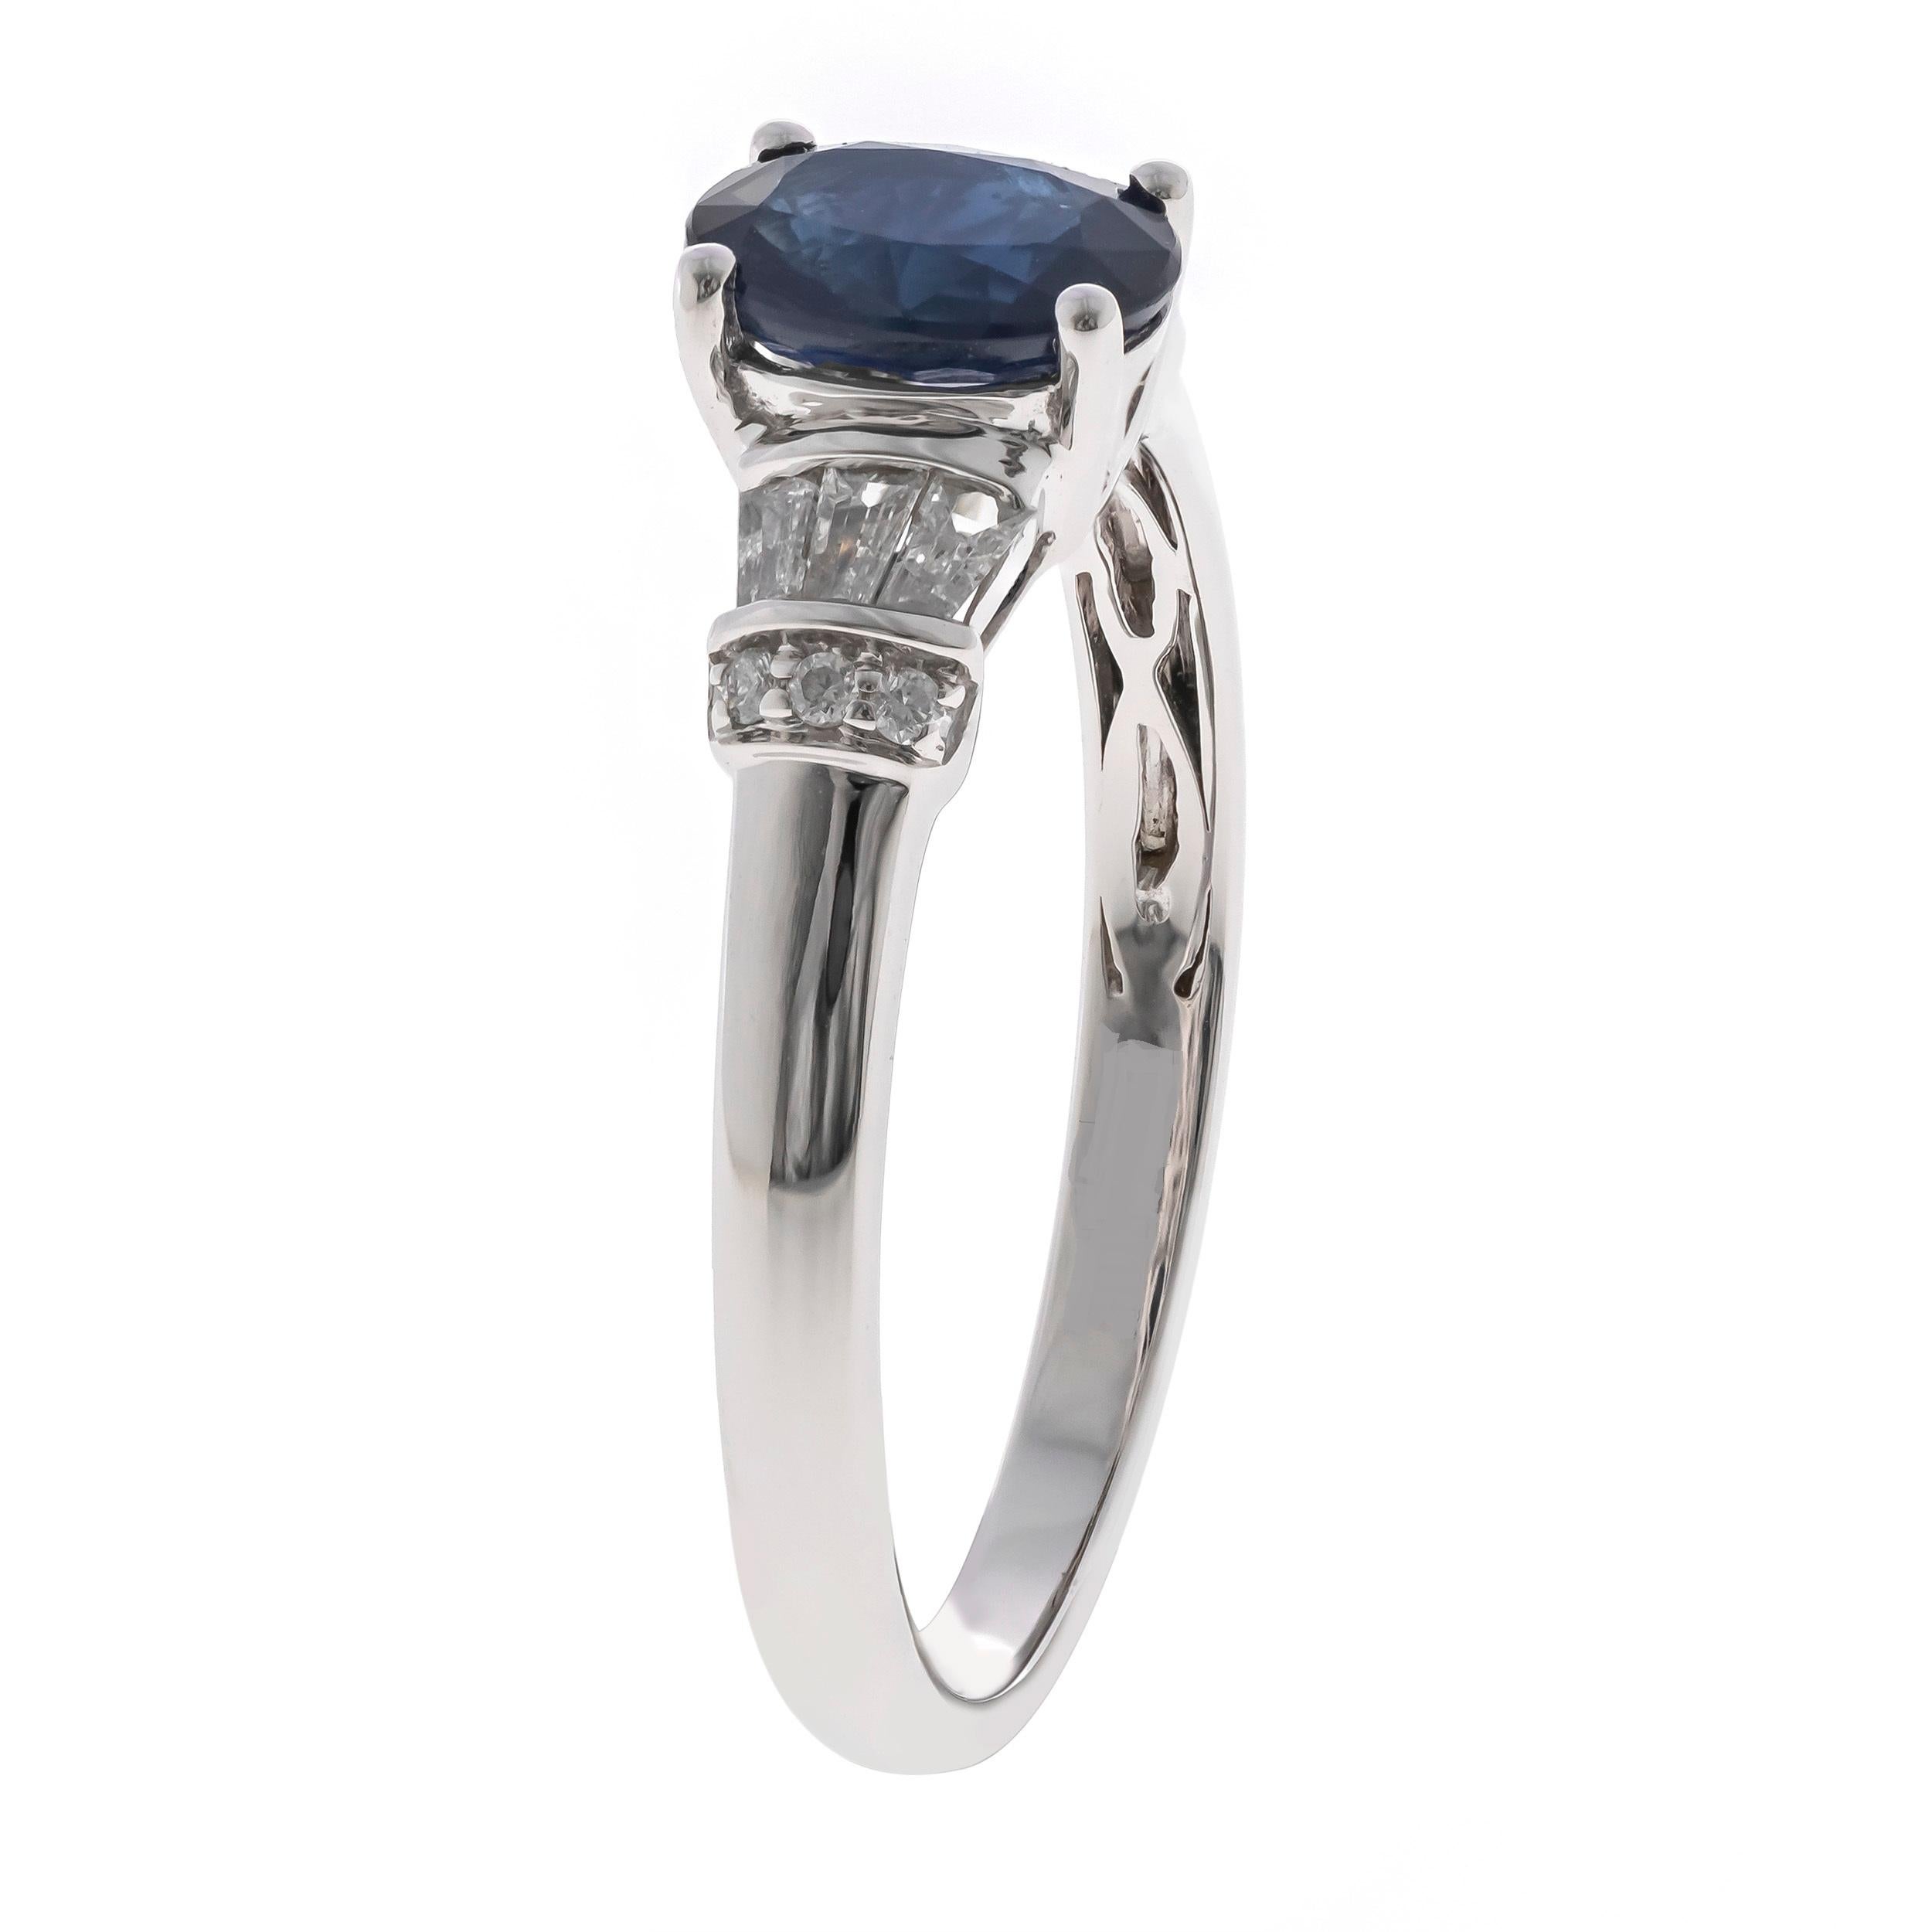 Decorate yourself in elegance with this Ring is crafted from 10-karat White Gold Gold by Gin & Grace. This Ring is made up of Oval-cut (1 pcs) 0.94 carat Blue Sapphire and Round Cut Diamond (6 Pcs) 0.03 Carat, Baguette-cut White Diamond (6 pcs) 0.16